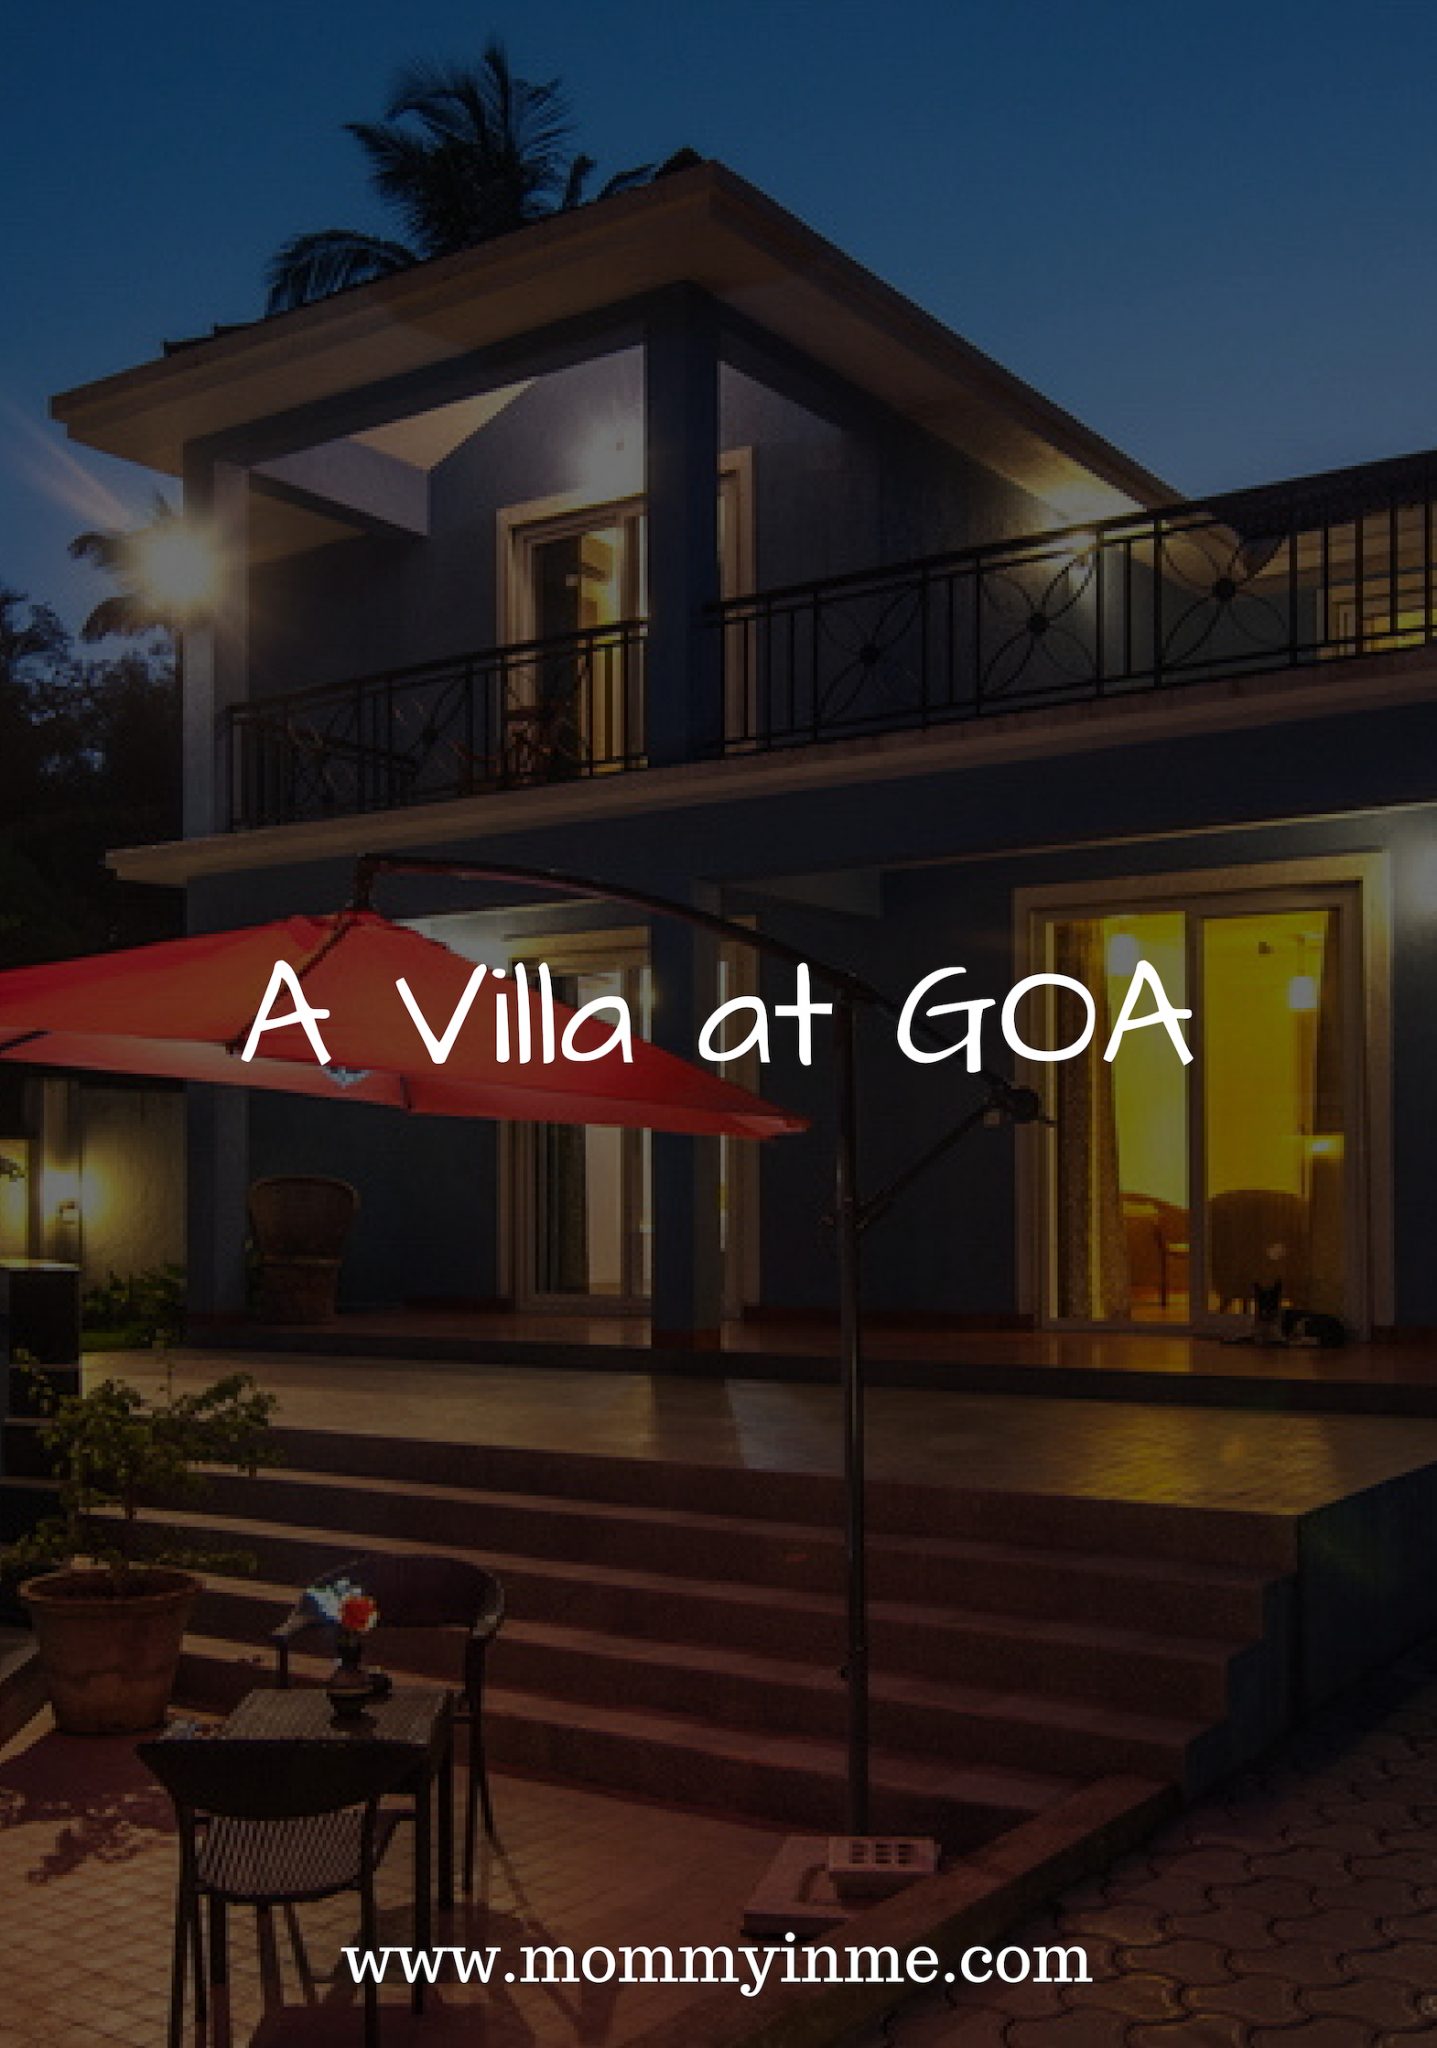 Goa is magnificence, a synonym of tranquility and party at the same time. While Goa is classified as North and South Goa, it has one of the most beautiful beach - Morjim beach which is also the nesting site of the endangered Olive Ridley Sea Turtle. How about buying a property at Goa to enjoy this grandeur? Then opt for services from Goa Villa Estate. #Goaproperty #buyproperty #propertytax #GoaVilla #goahomes #morjimbeach #Goa #seaturtle #Calangute #bagaBeach #Travel